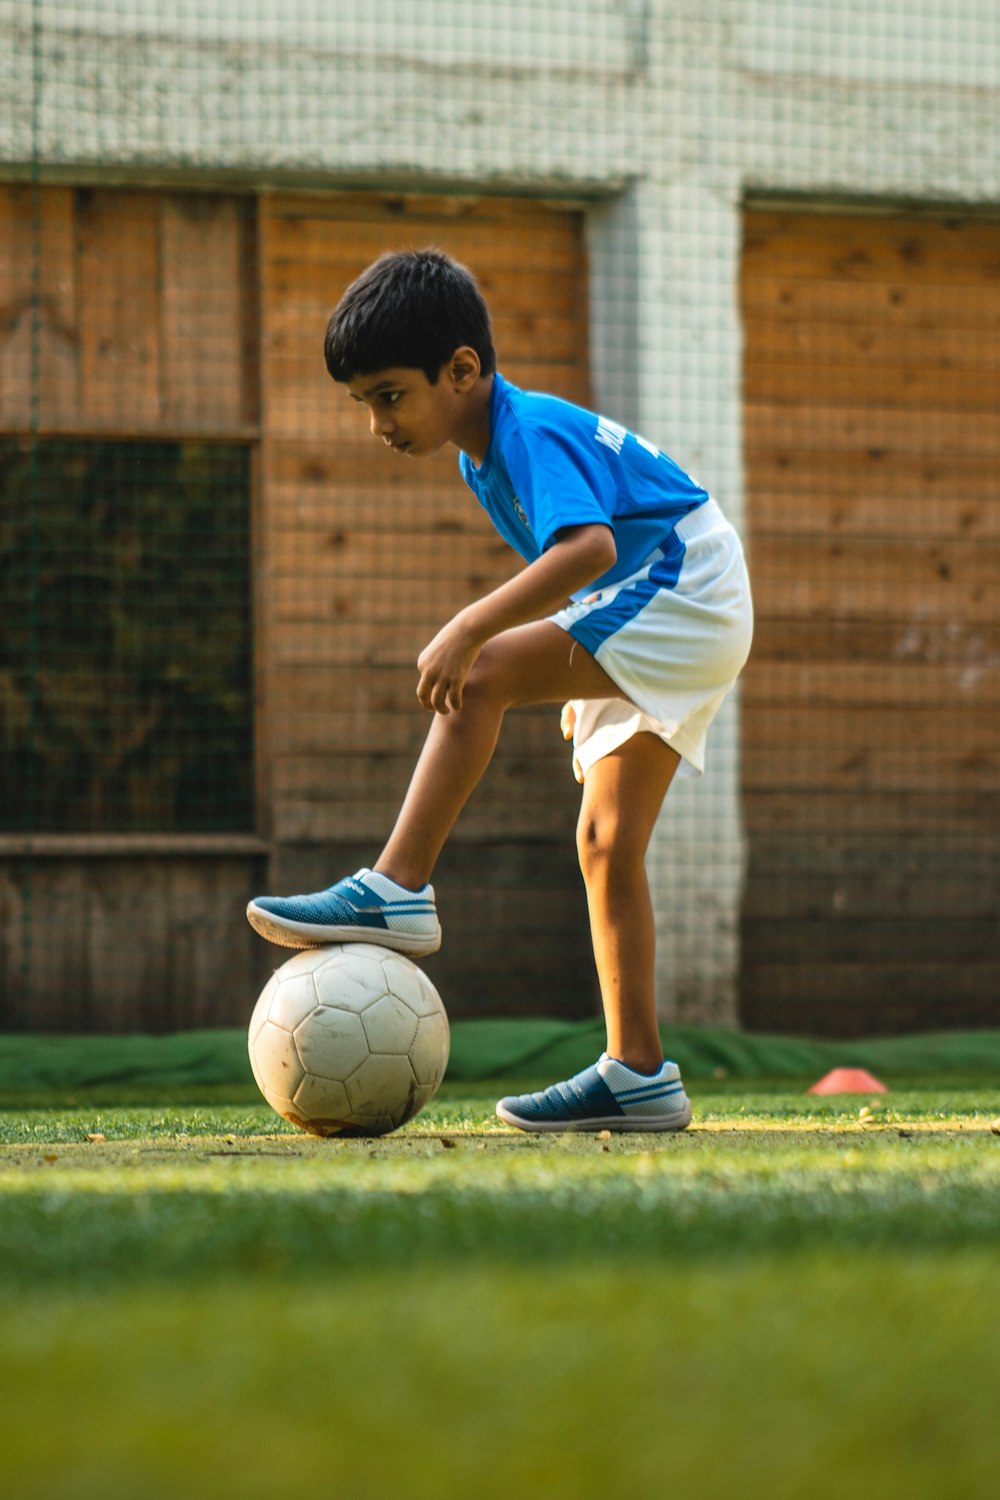 boy in blue and white shirt playing soccer